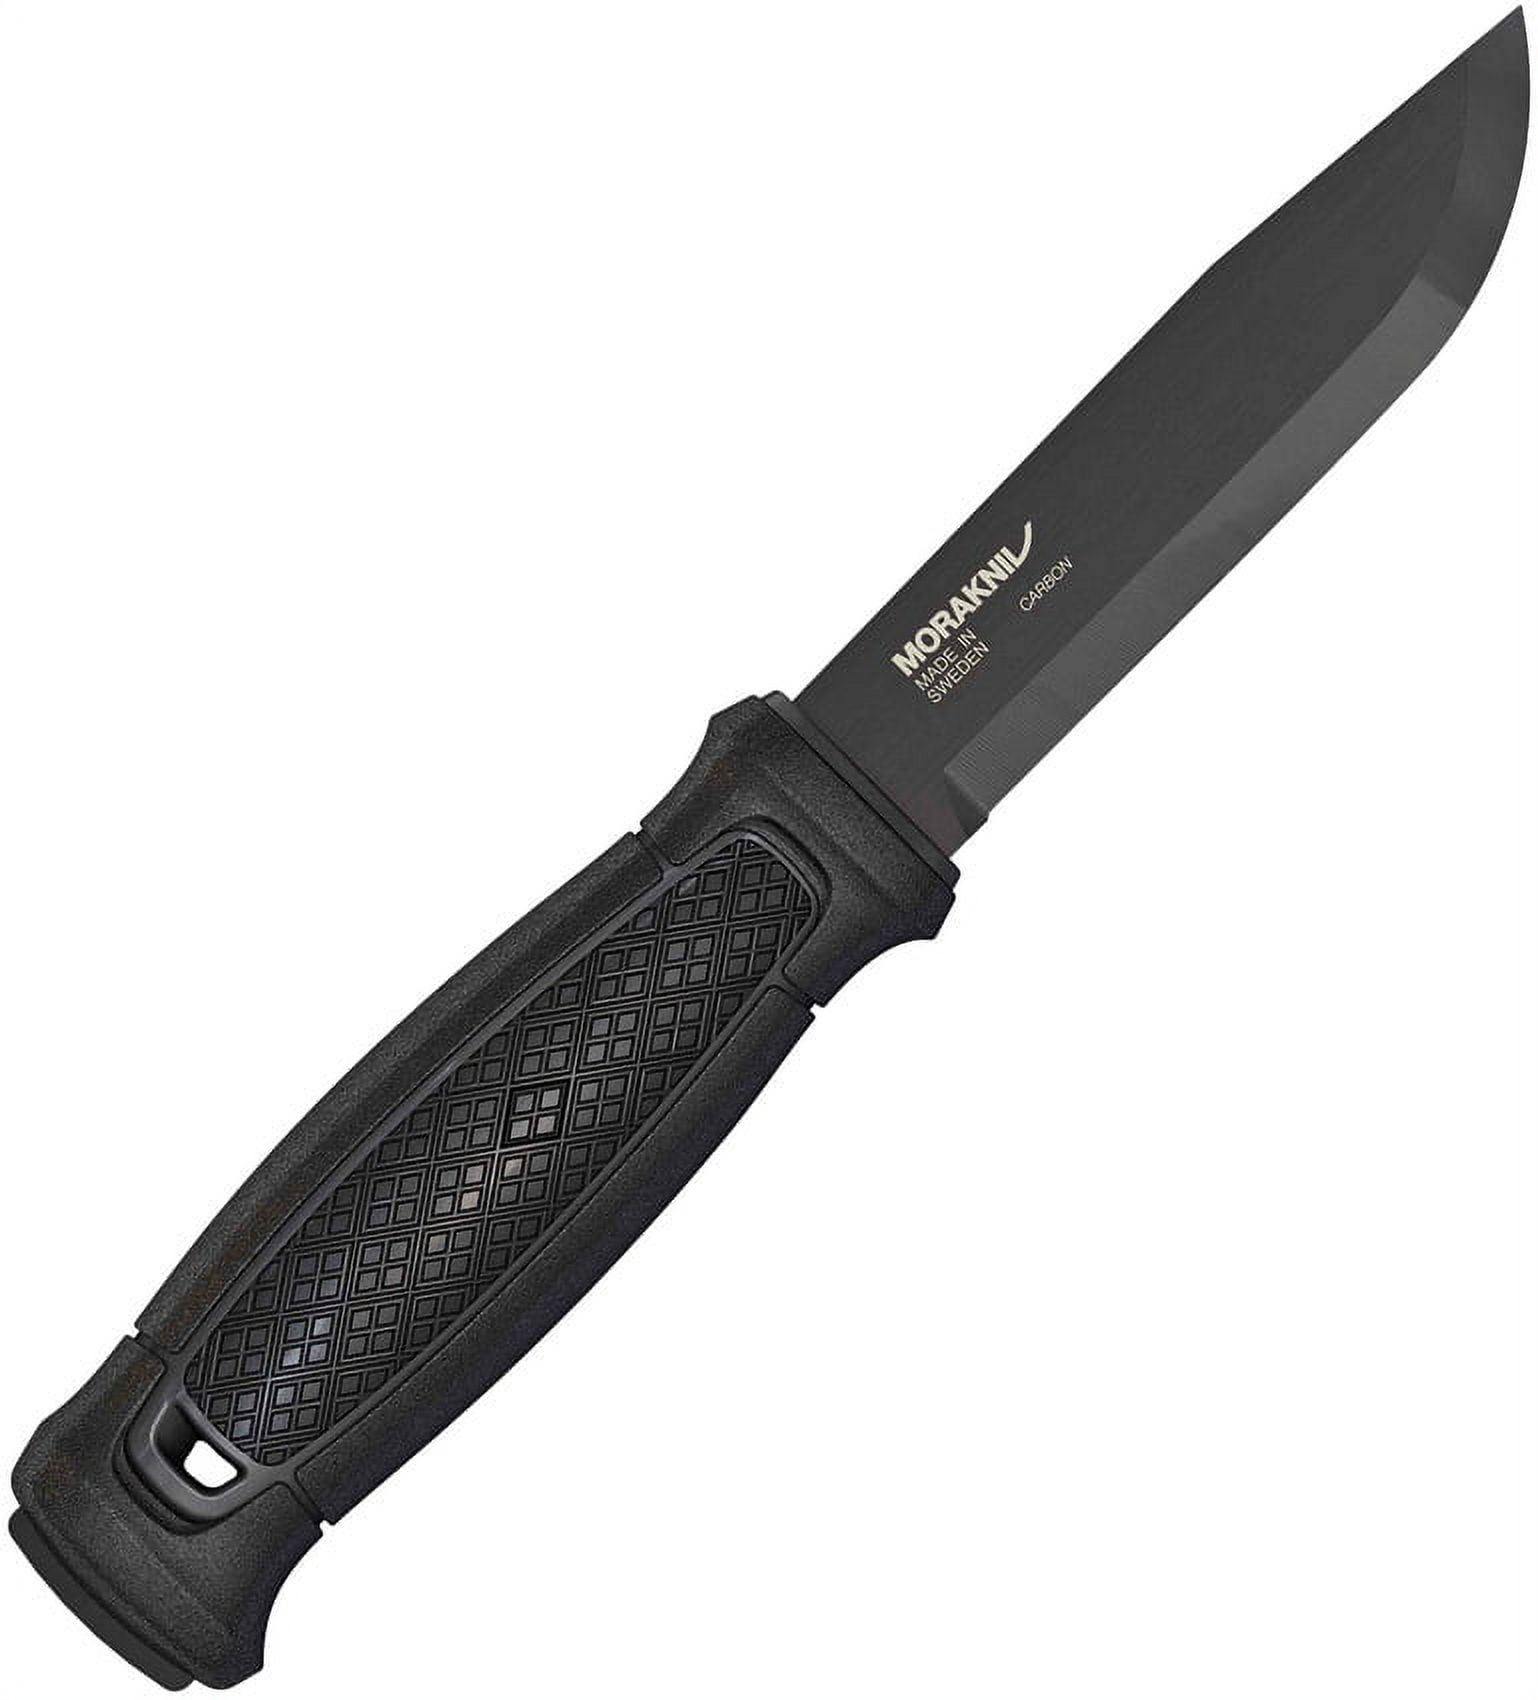 Morakniv Garberg Full Tang Fixed Blade Knife with Carbon Steel Blade,  4.3-Inch 